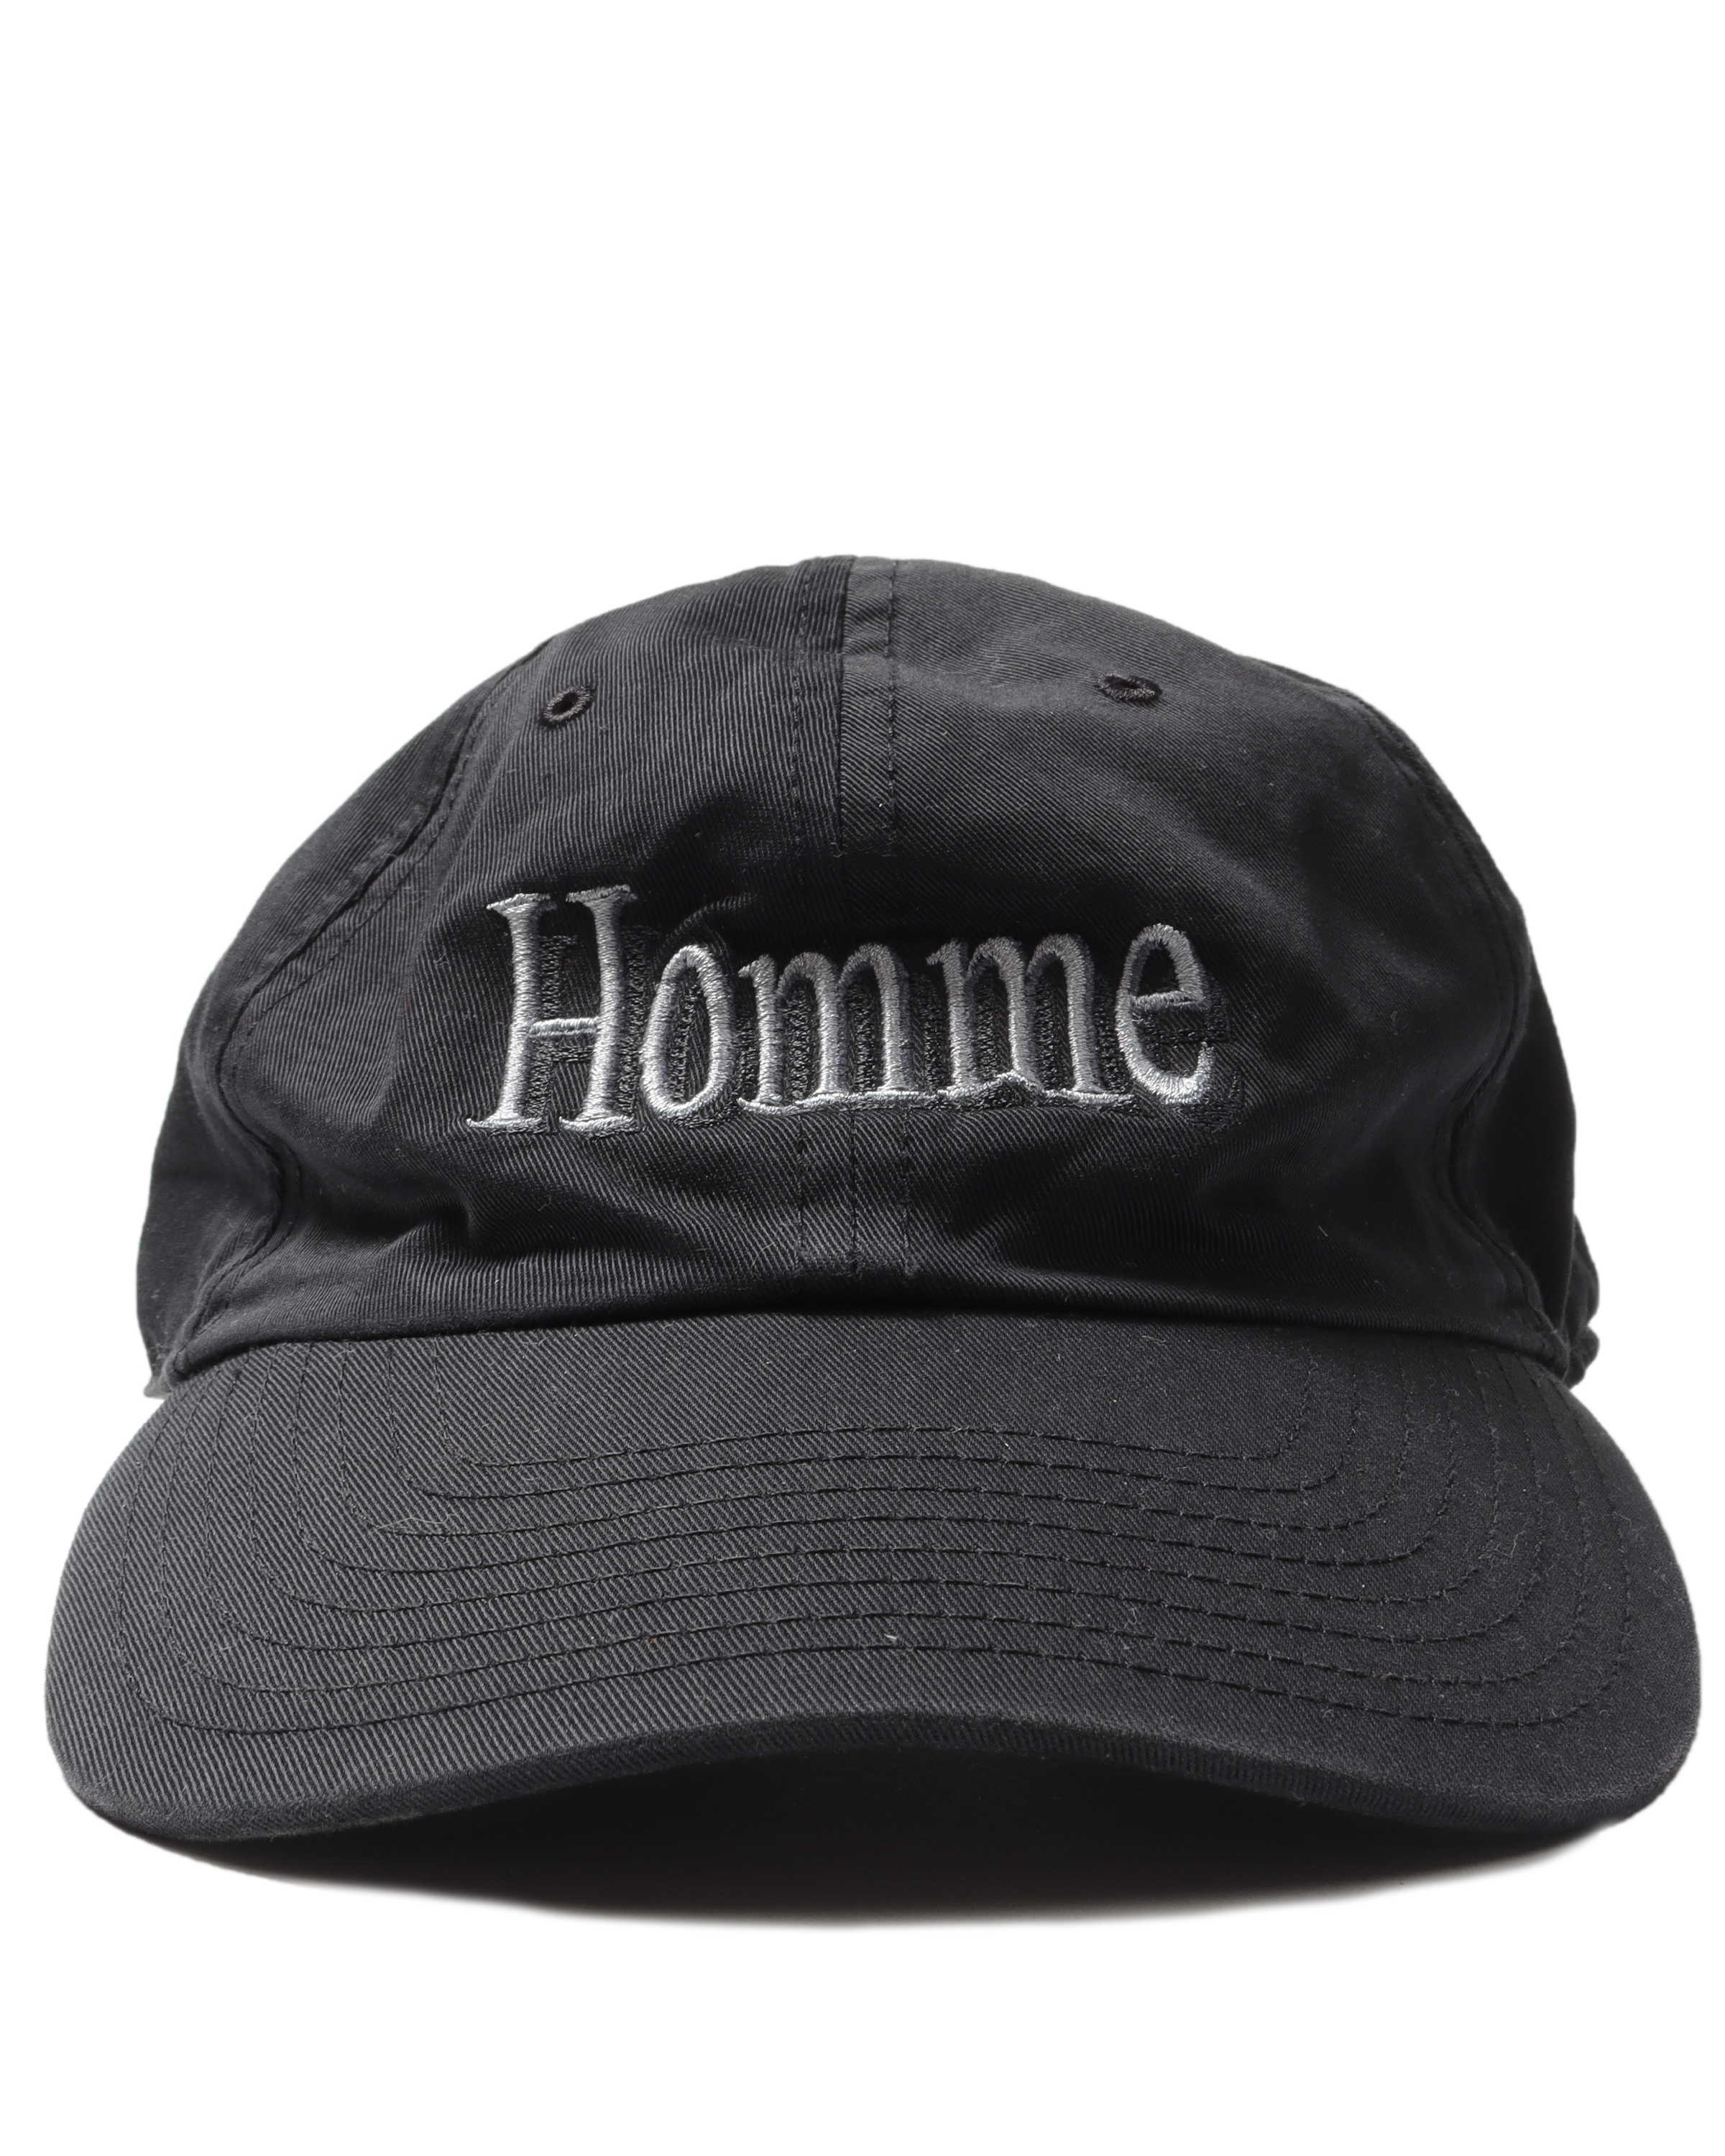 "Homme" Embroidered Hat